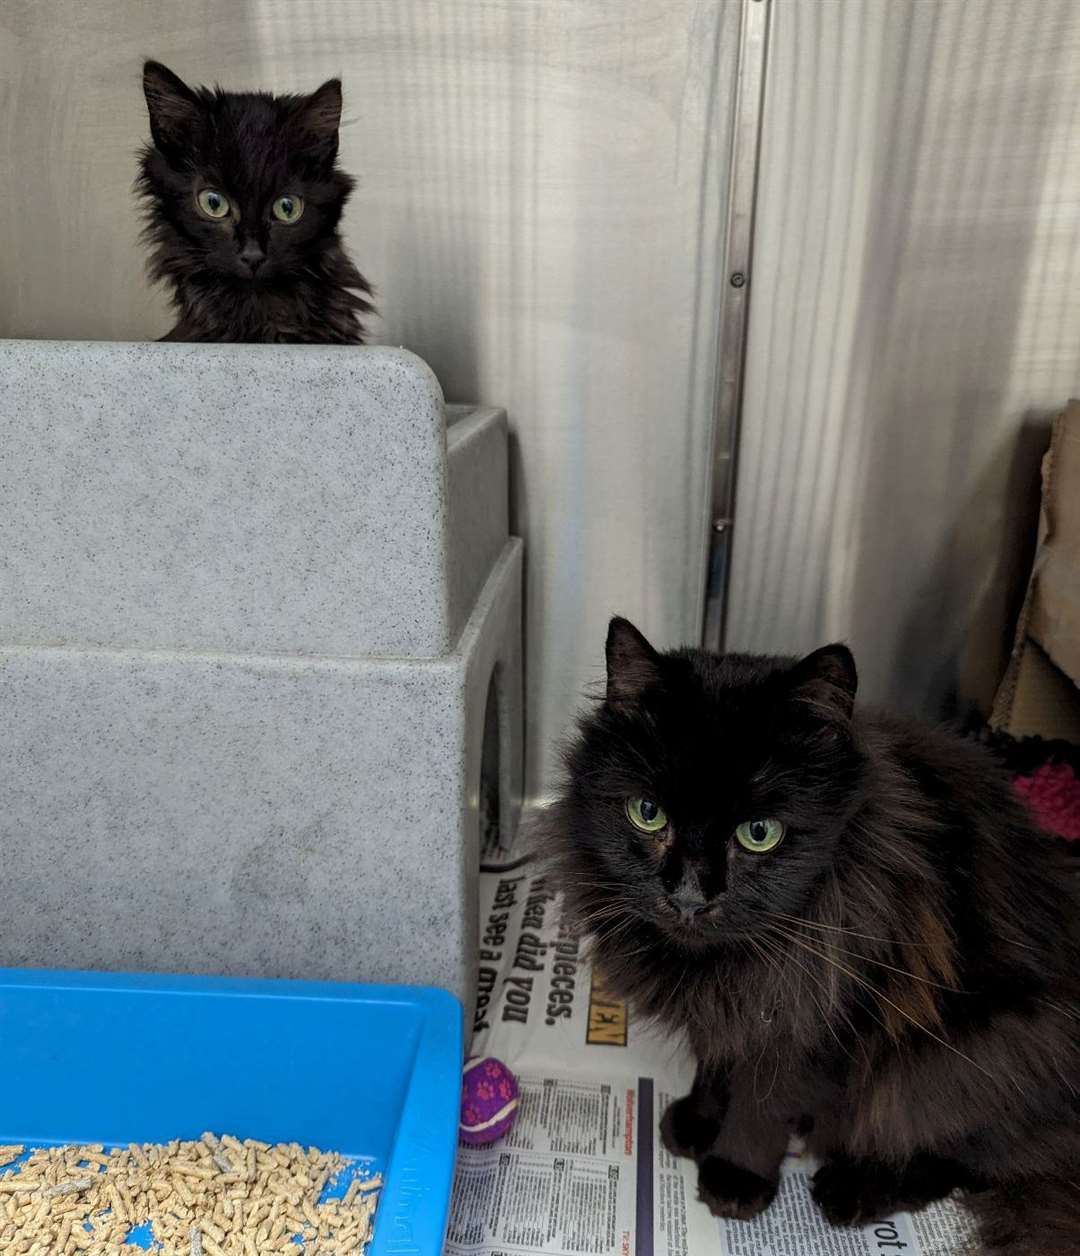 The cats have been named Morticia and Wednesday. Picture: RSPCA